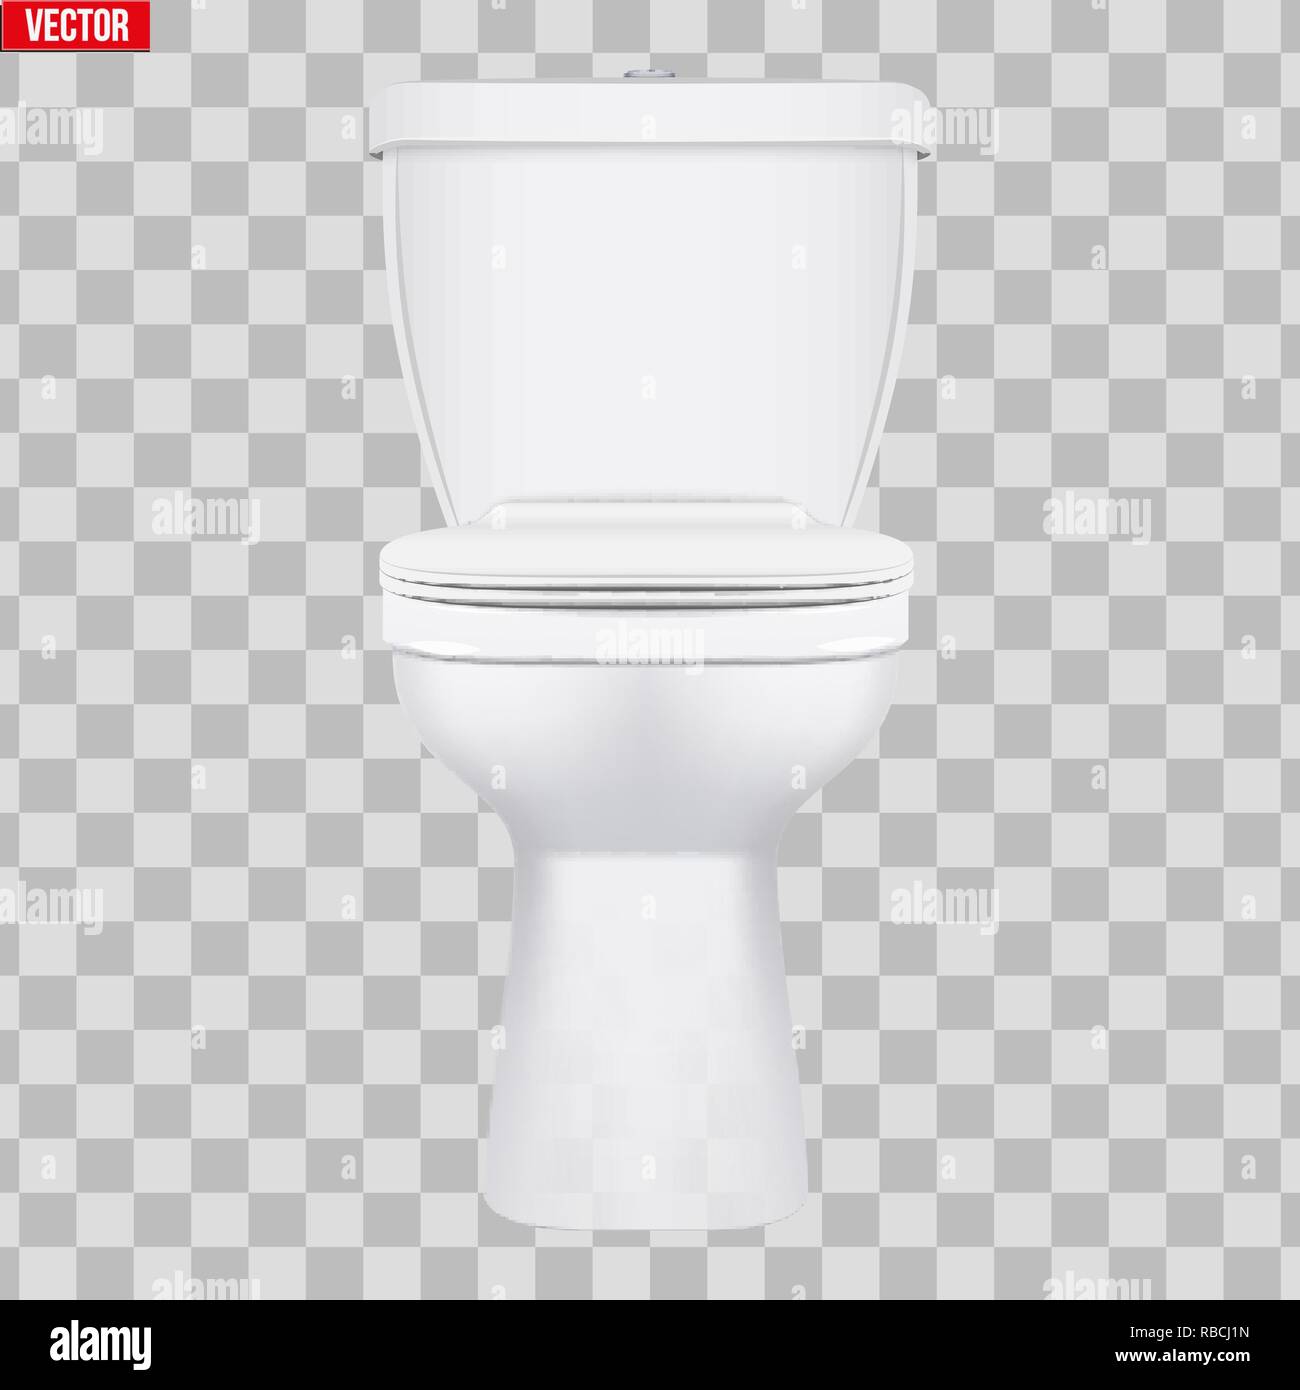 4,377 Toilet Ball Images, Stock Photos, 3D objects, & Vectors